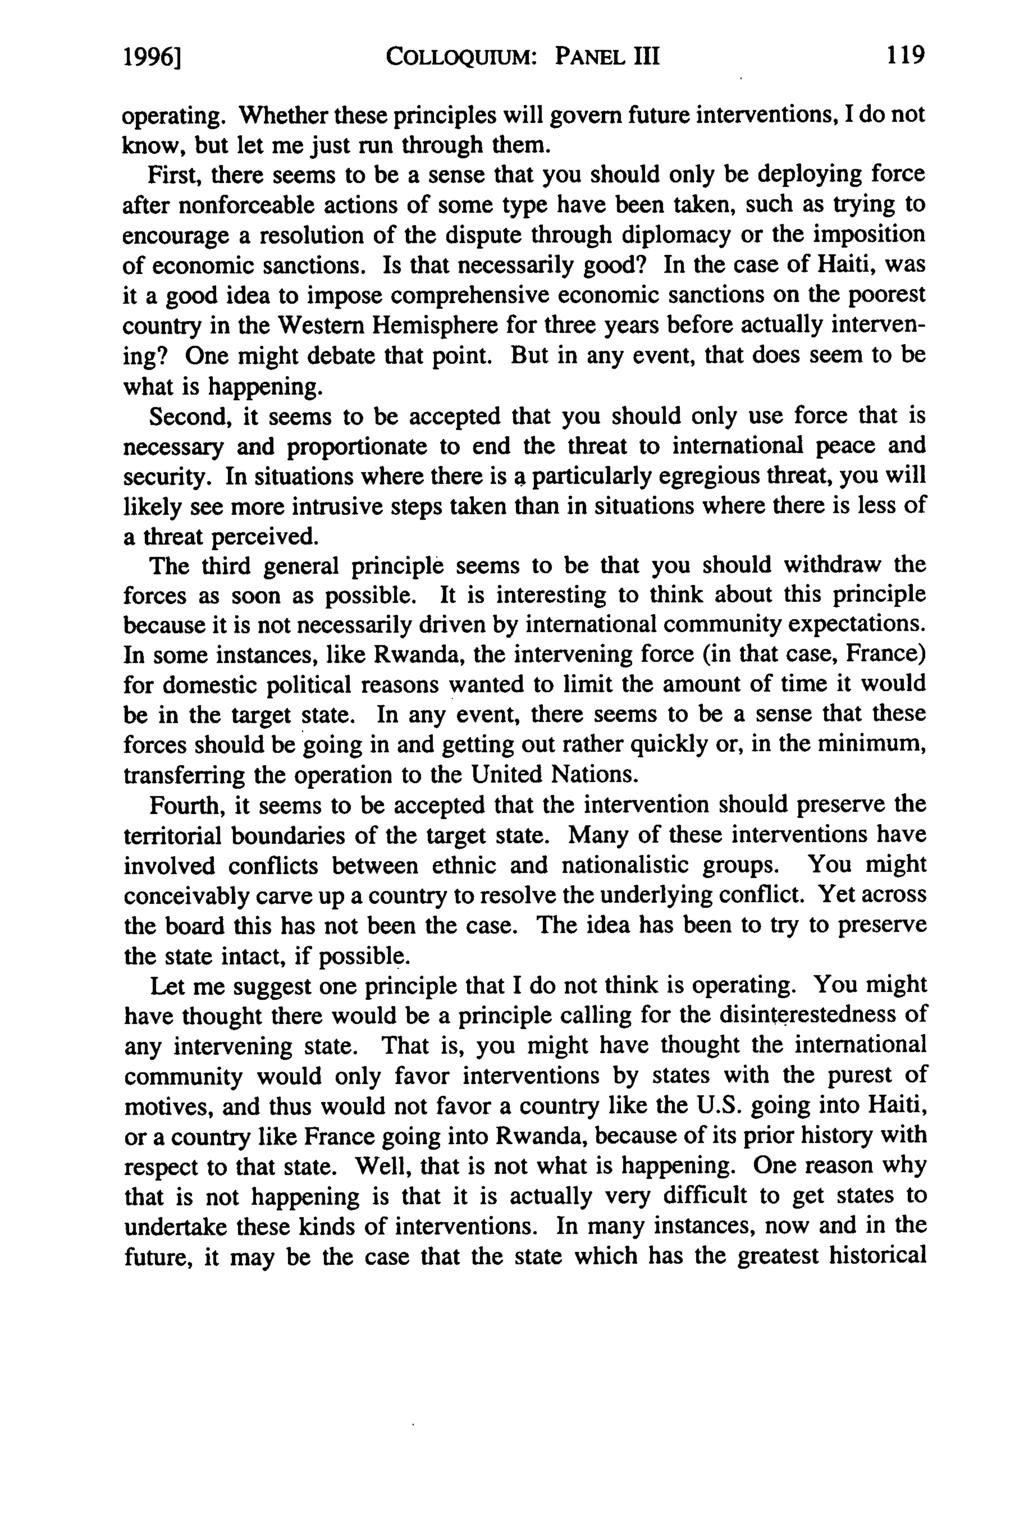 1996] COLLOQUIUM: PANEL III operating. Whether these principles will govern future interventions, I do not know, but let me just run through them.